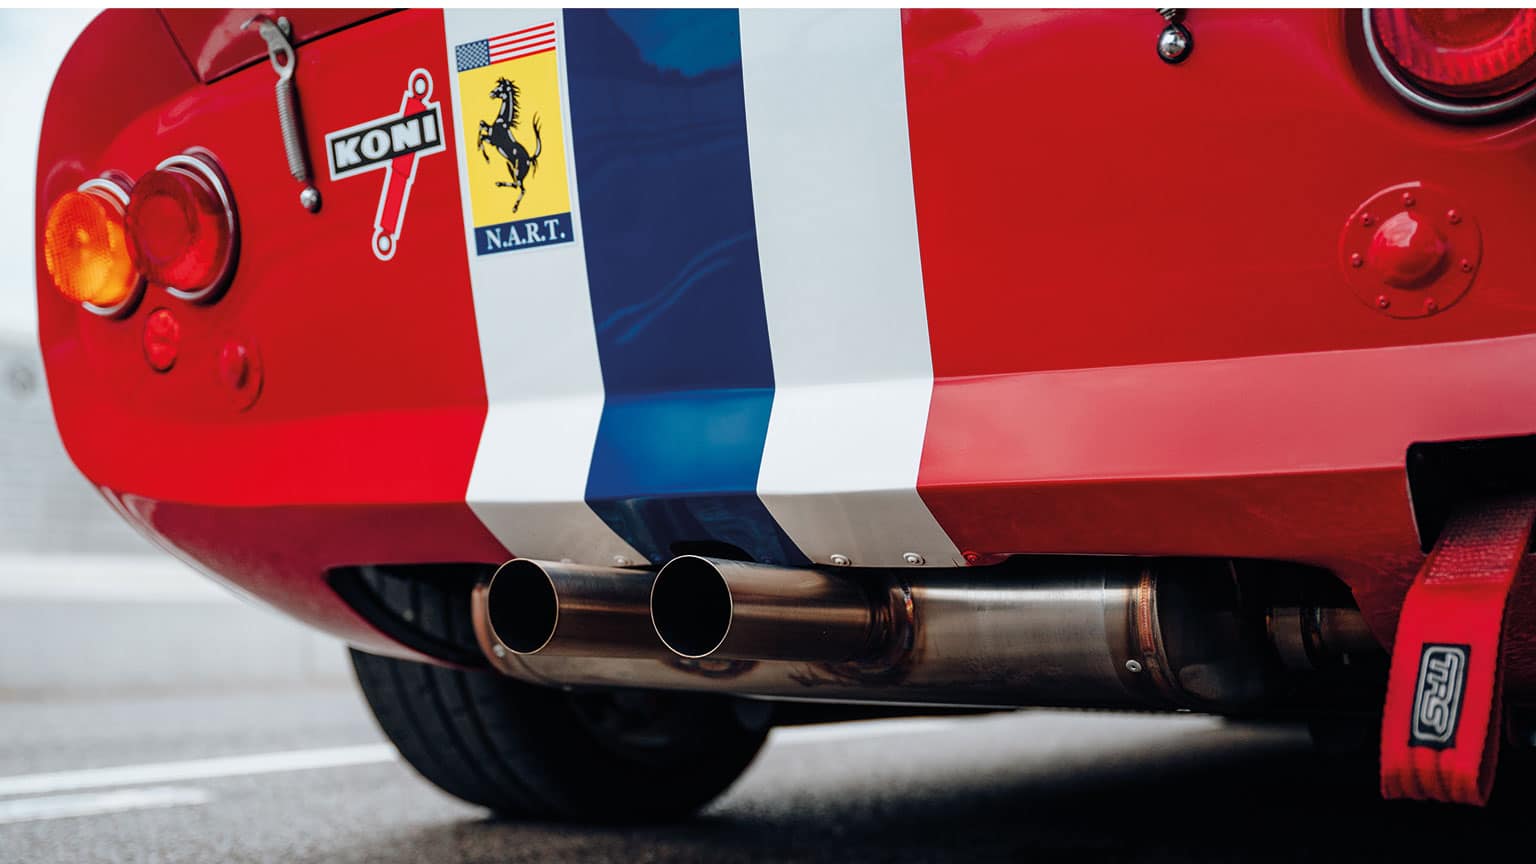 The rear bumper of the dino with Ferrari badging